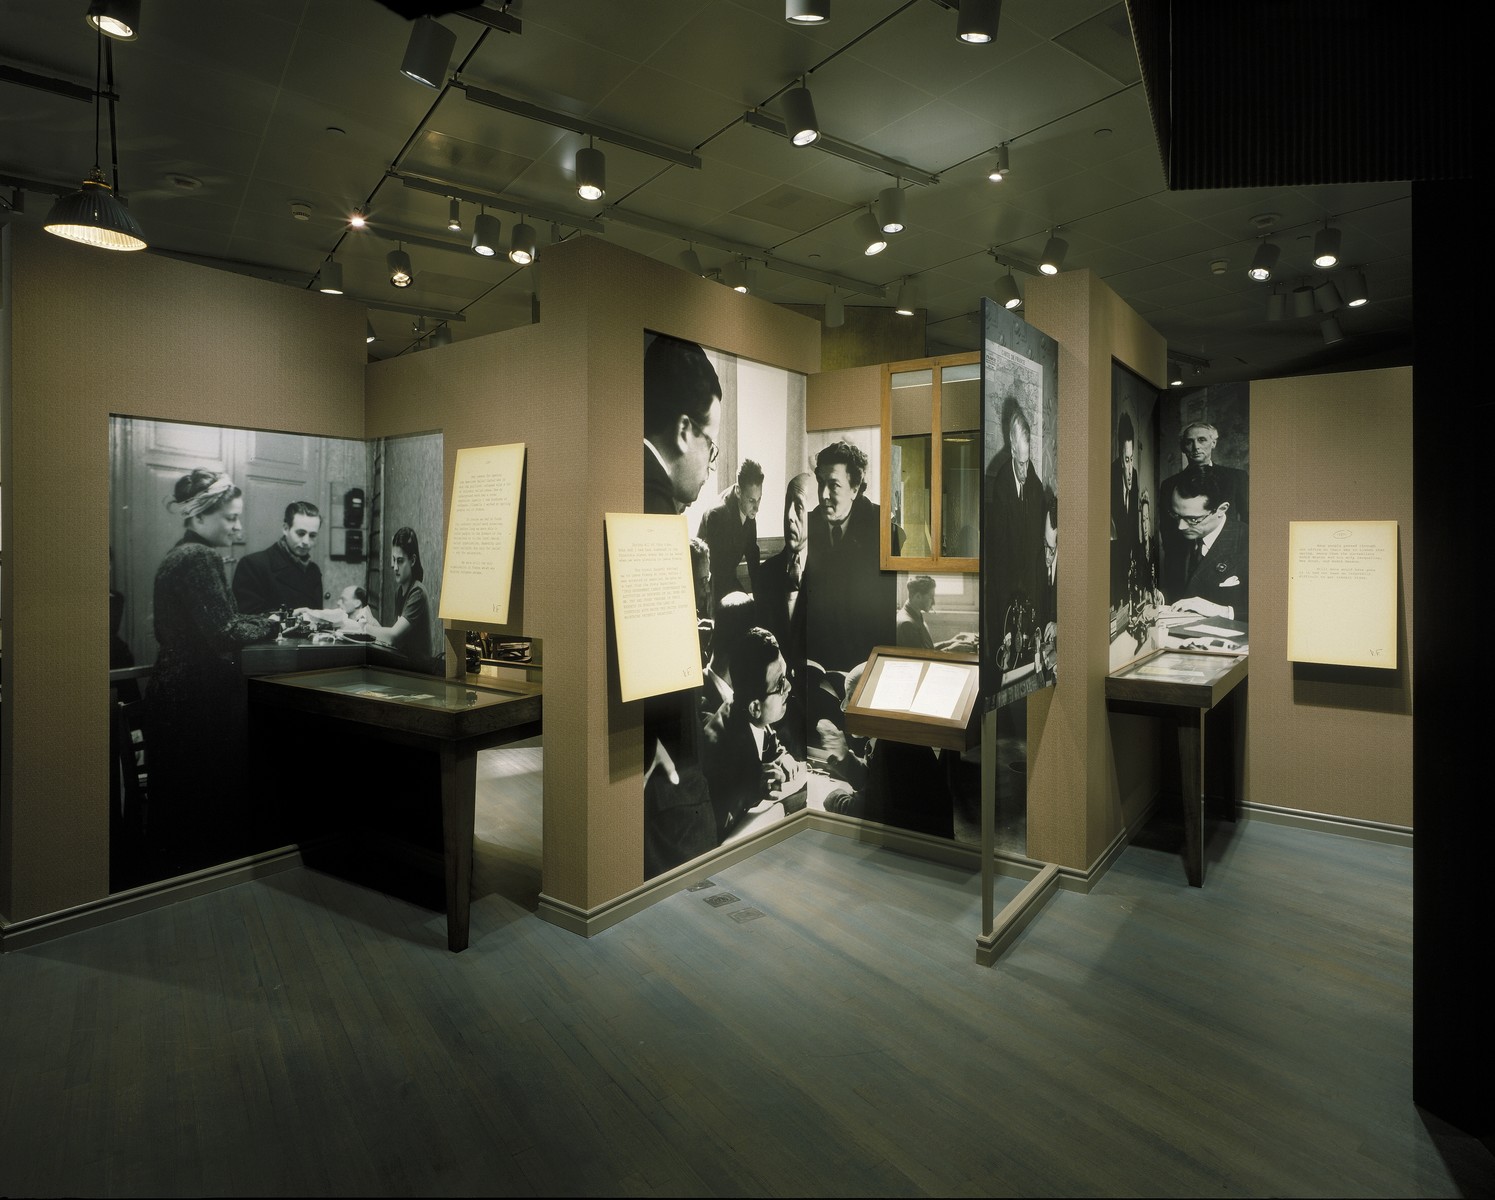 Segment of the special exhibition, "Assignment: Rescue. The Story of Varian Fry and the Emergency Rescue Committee," at the U.S. Holocaust Memorial Museum.